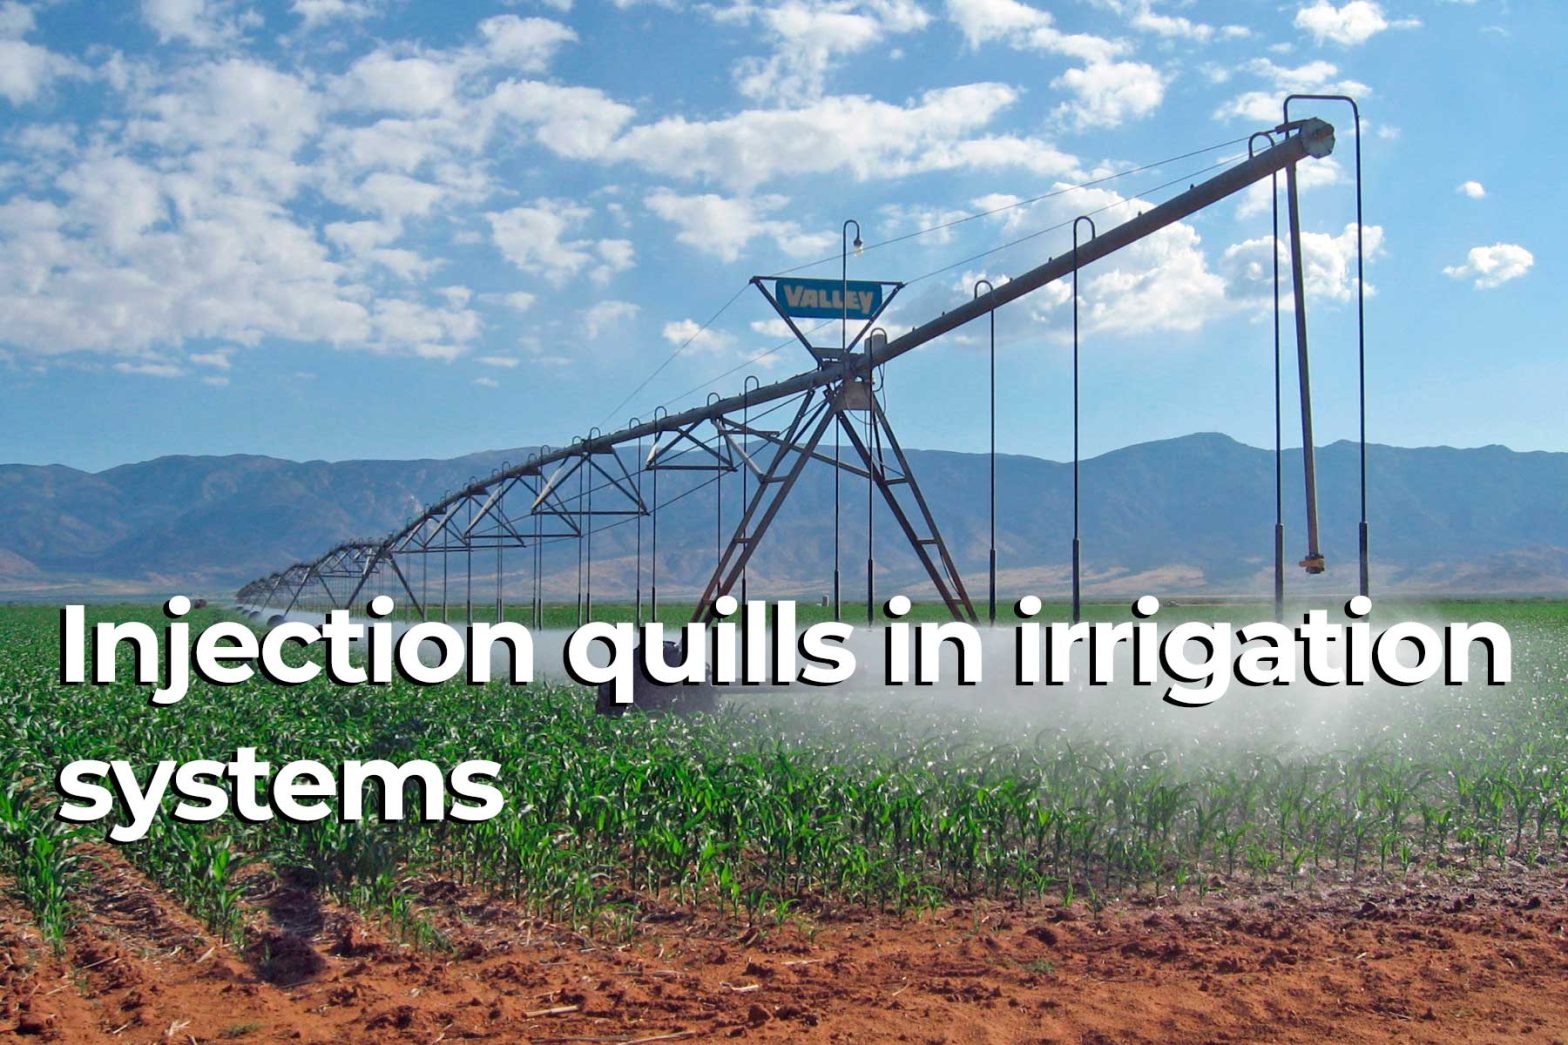 Injection quills for irrigation systems